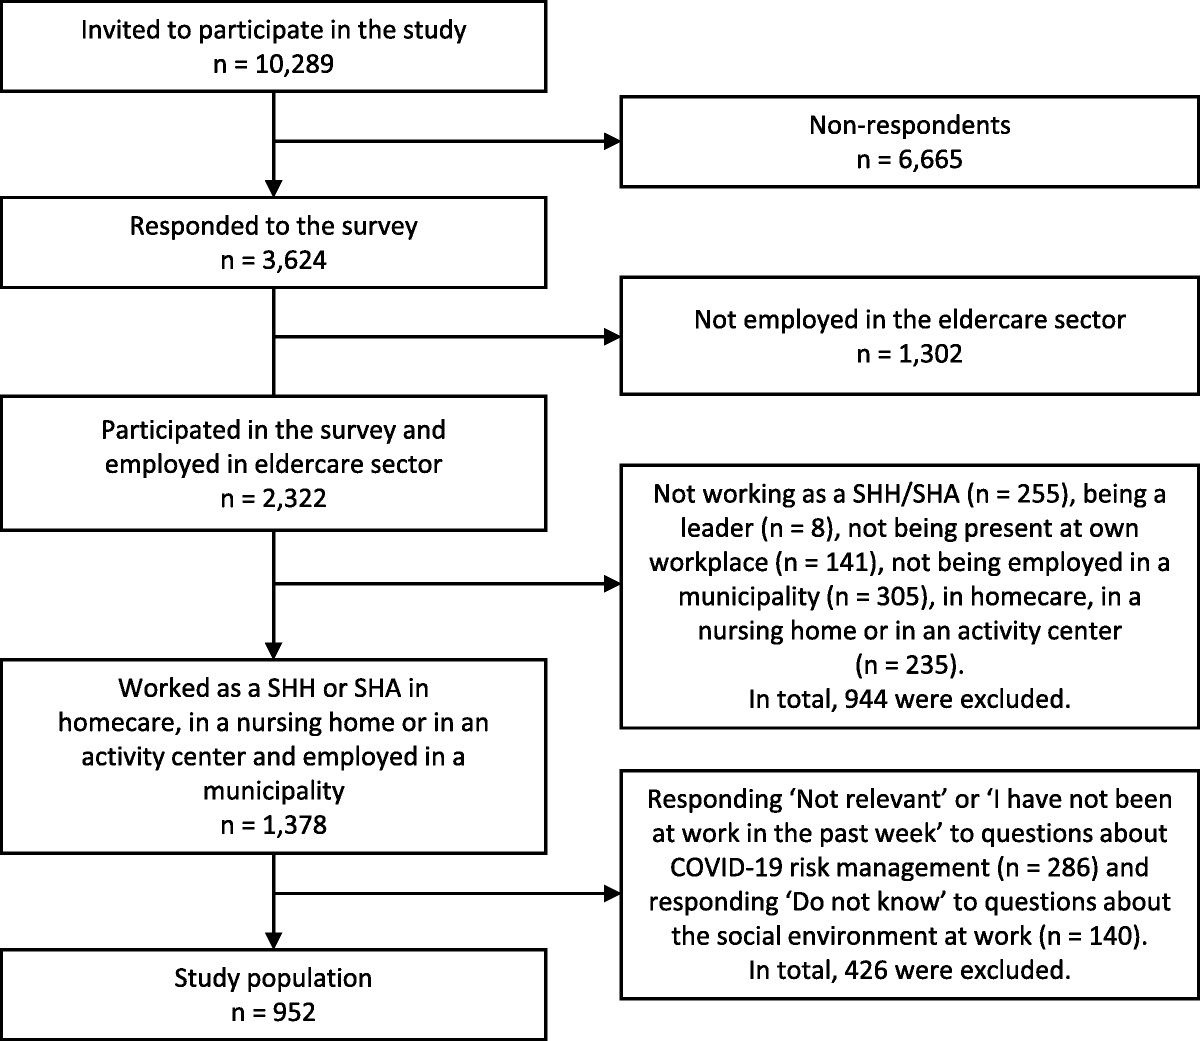 How Risk Management During COVID-19 Influences Eldercare Personnel's Perceptions of Their Work Environment